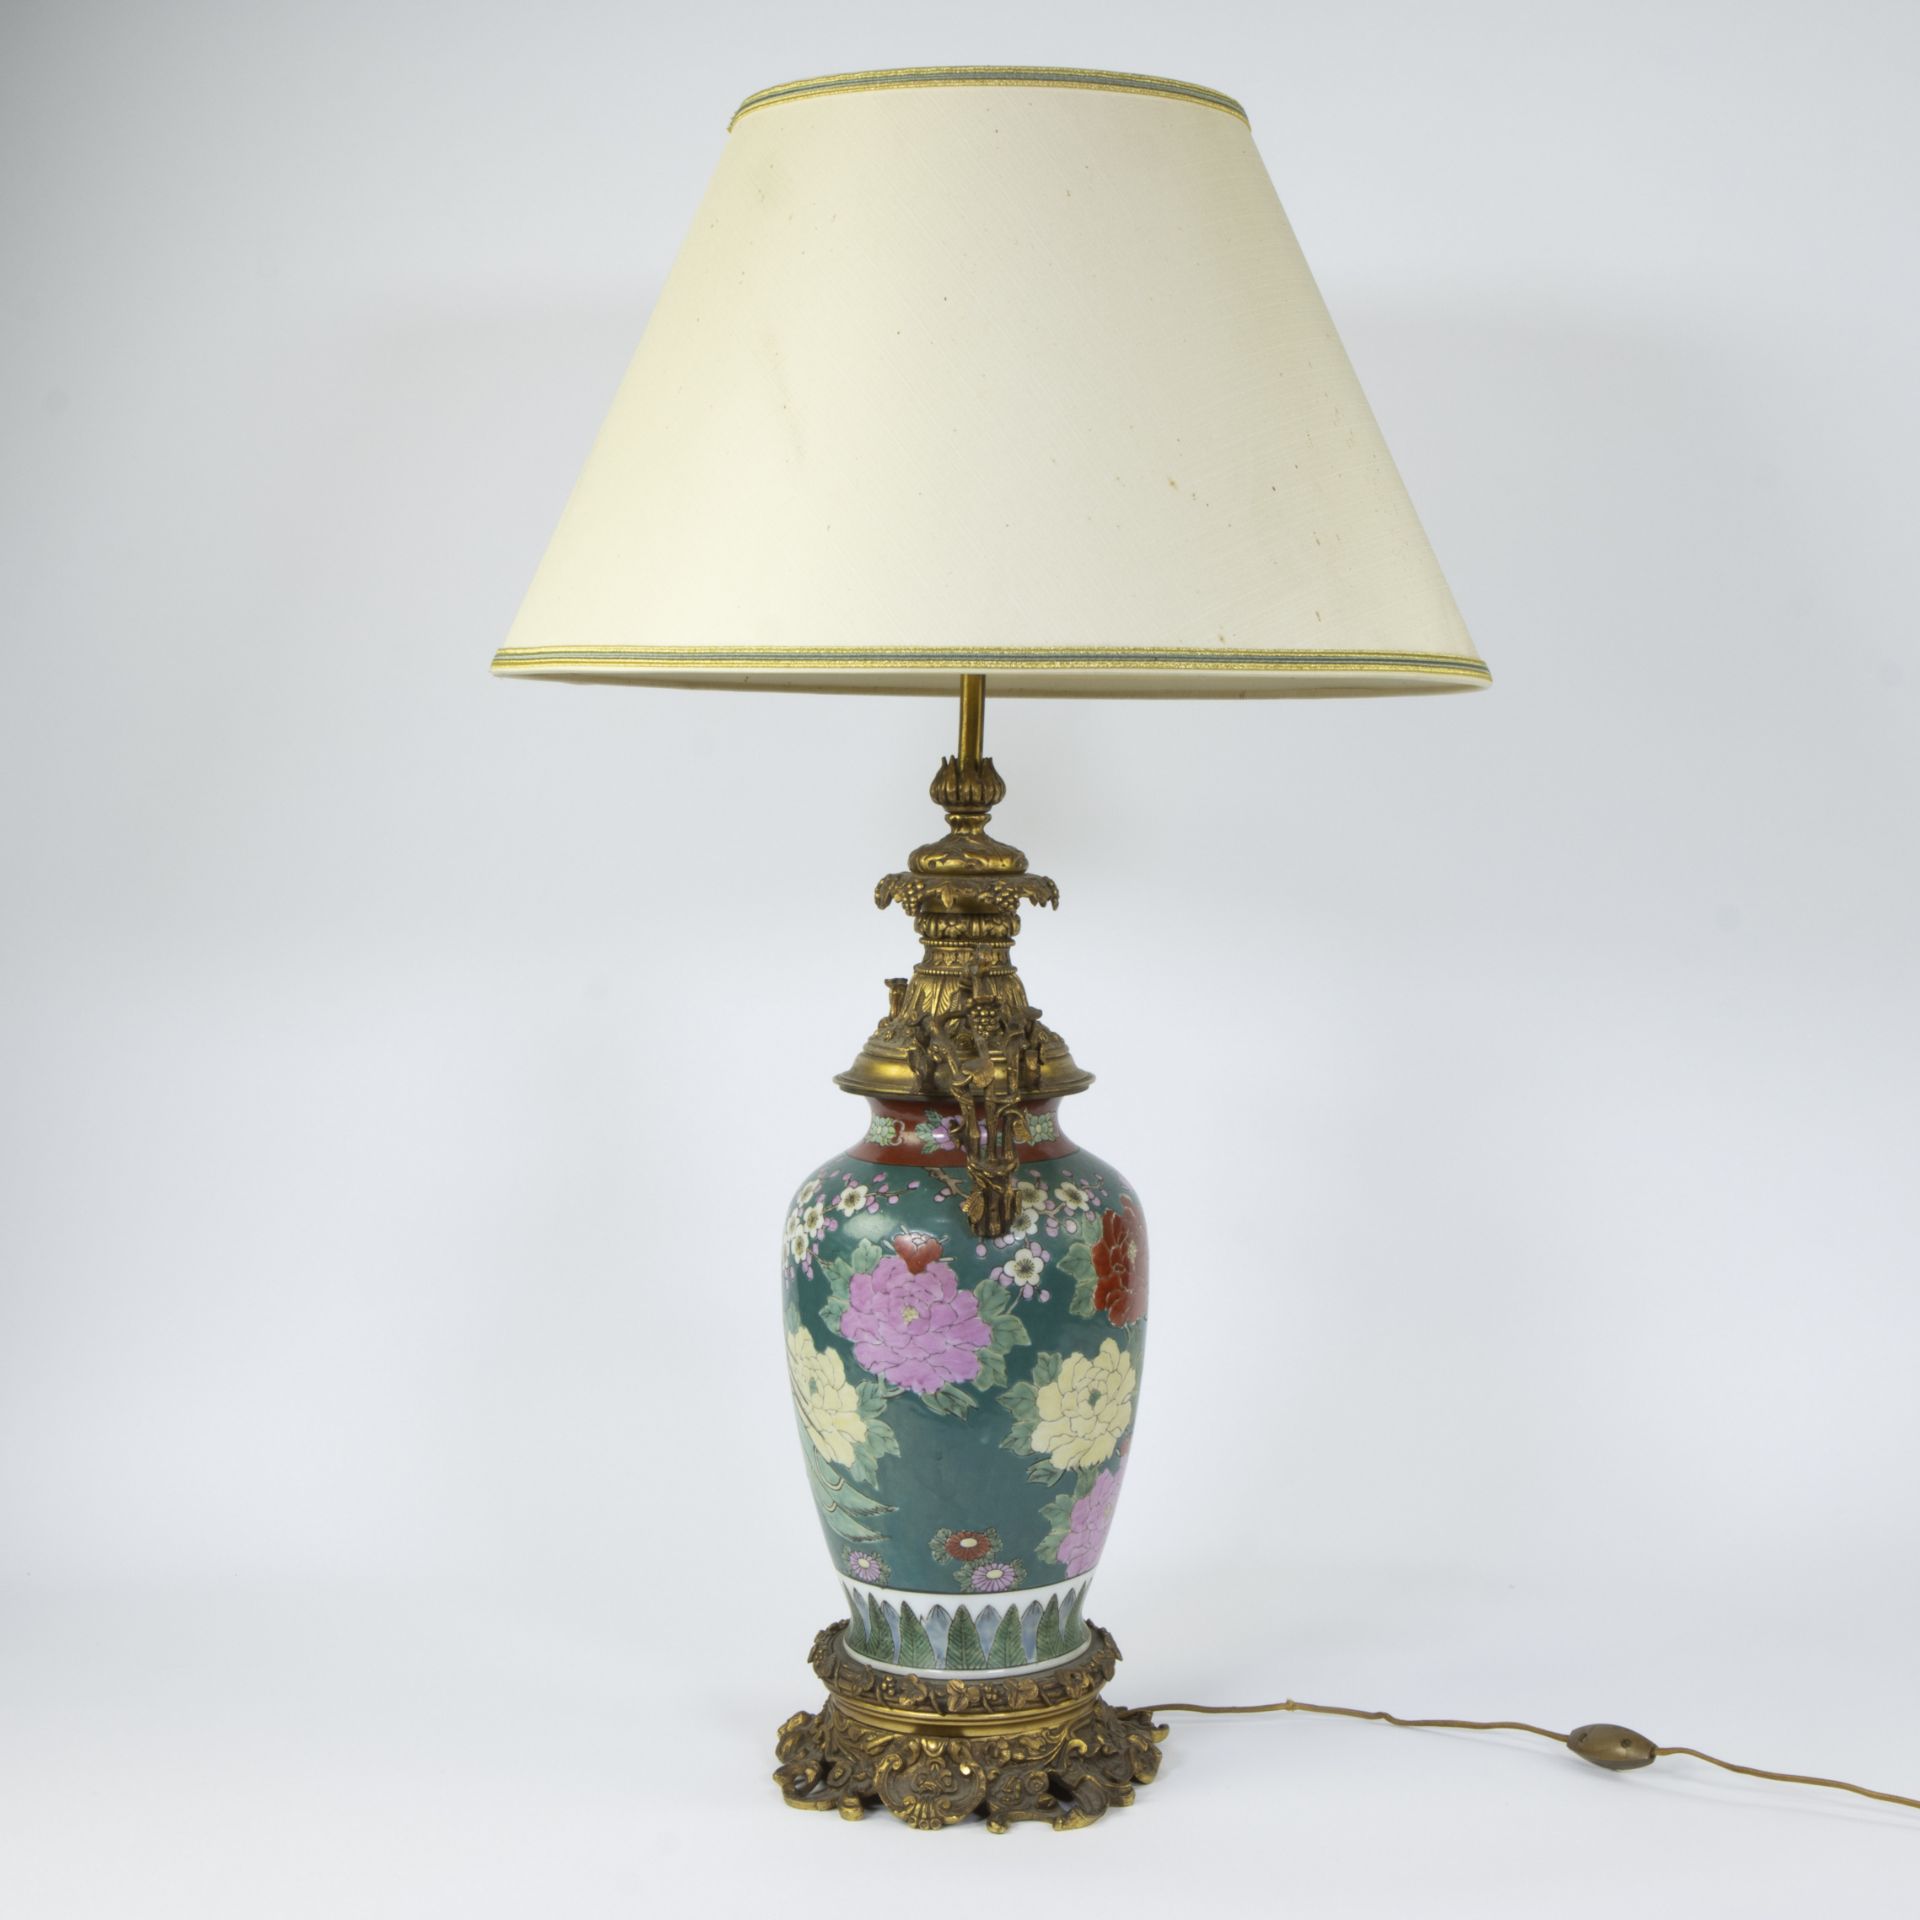 Japanese vase transformed into lampadaire with decor of peacock and flowers and rich bronze fittings - Image 4 of 4